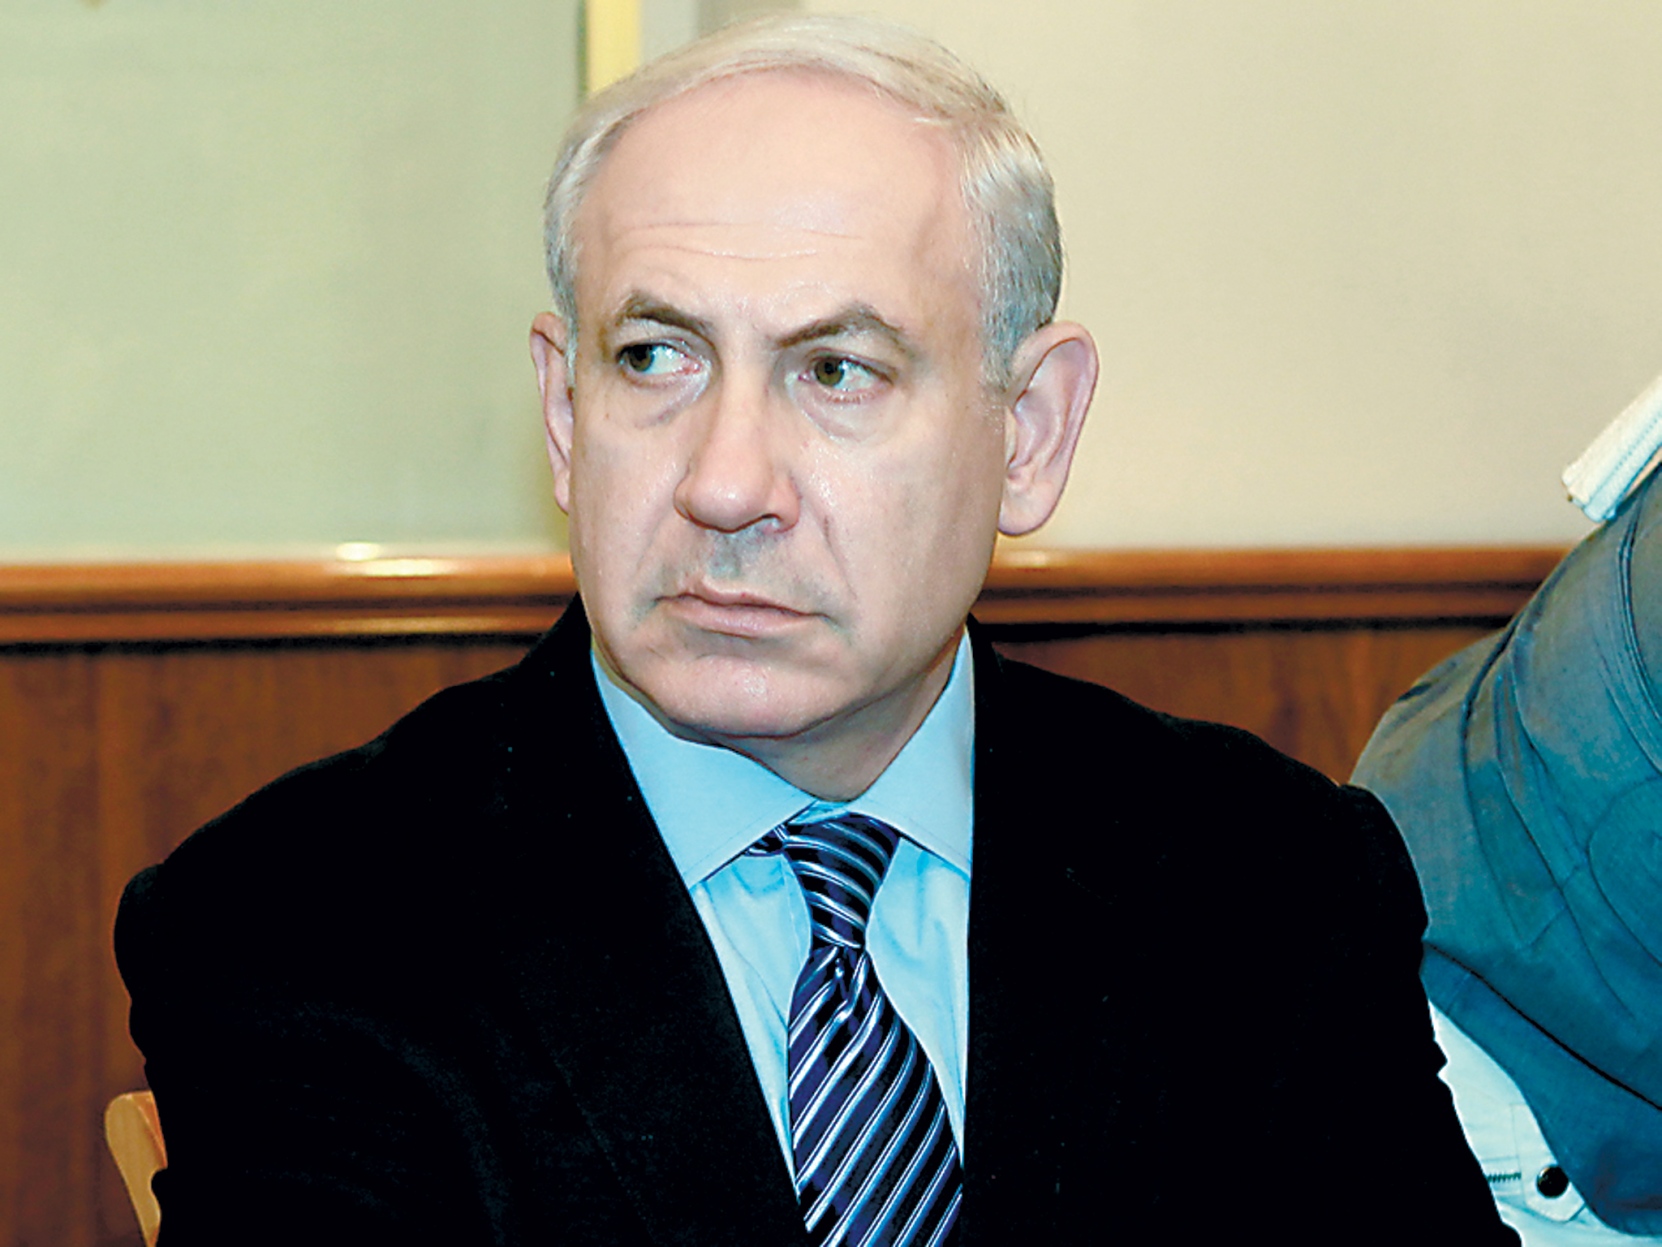 Netanyahu trial: Ex-PM's lawyer claims police gave prosecution witness special treatment